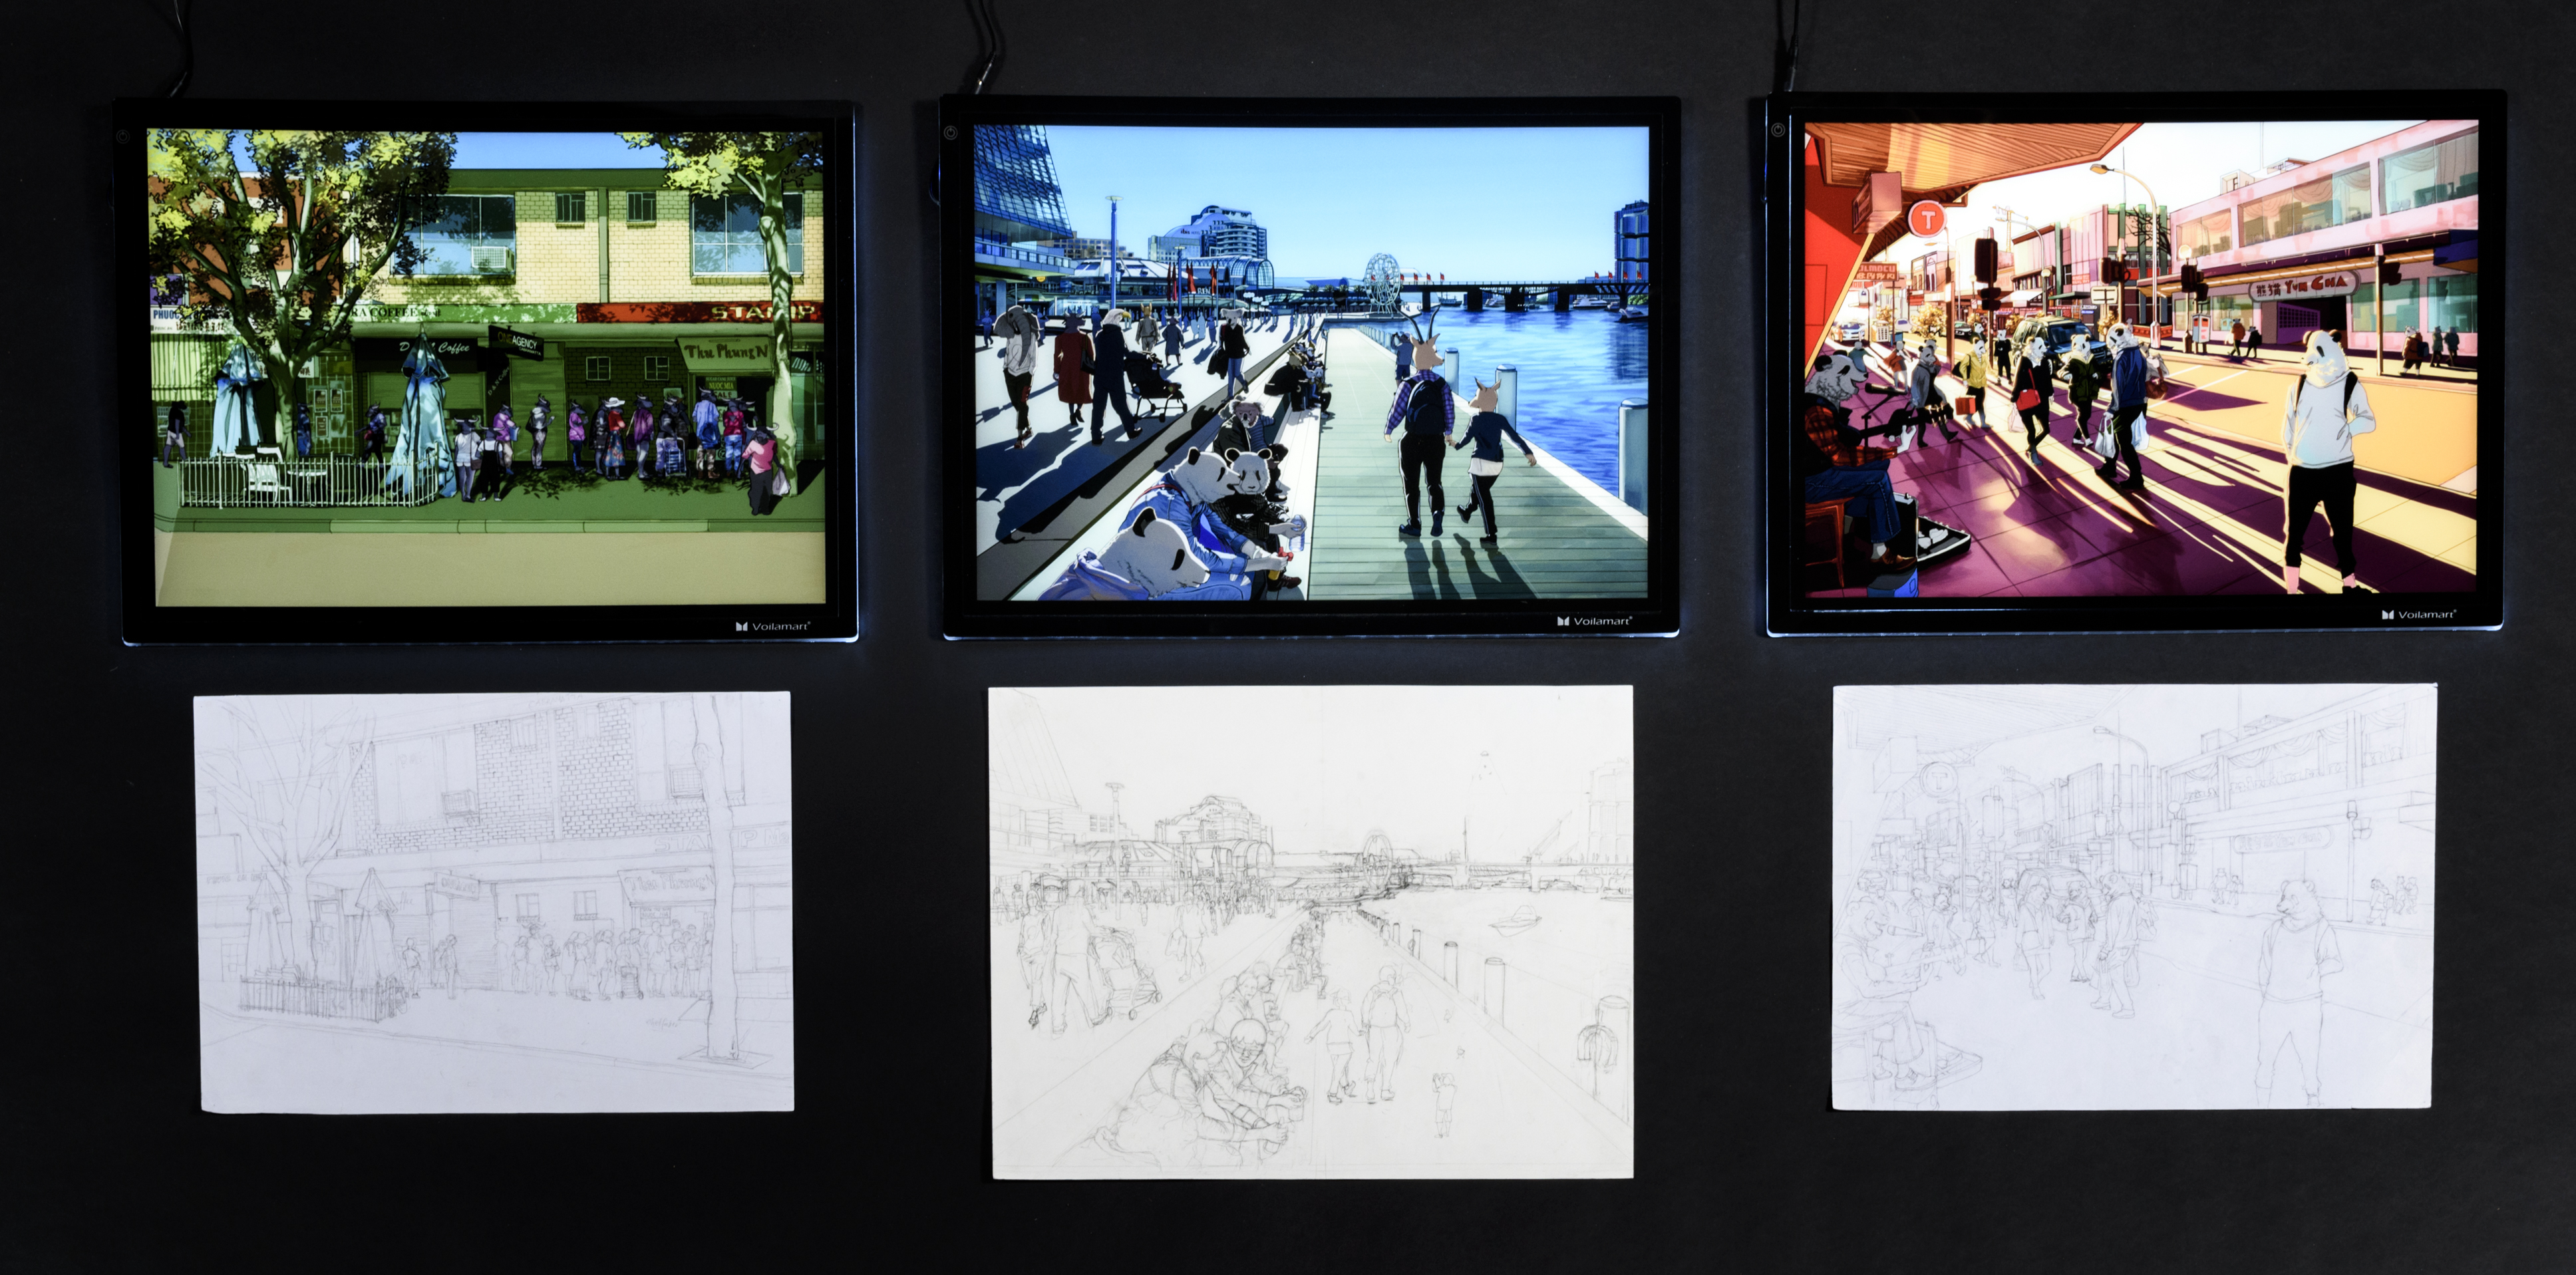 Three animation like stills showing streetscenes featuring animals with human bodies. Below each coloured work if the pencil sketch/storyboard illustration.